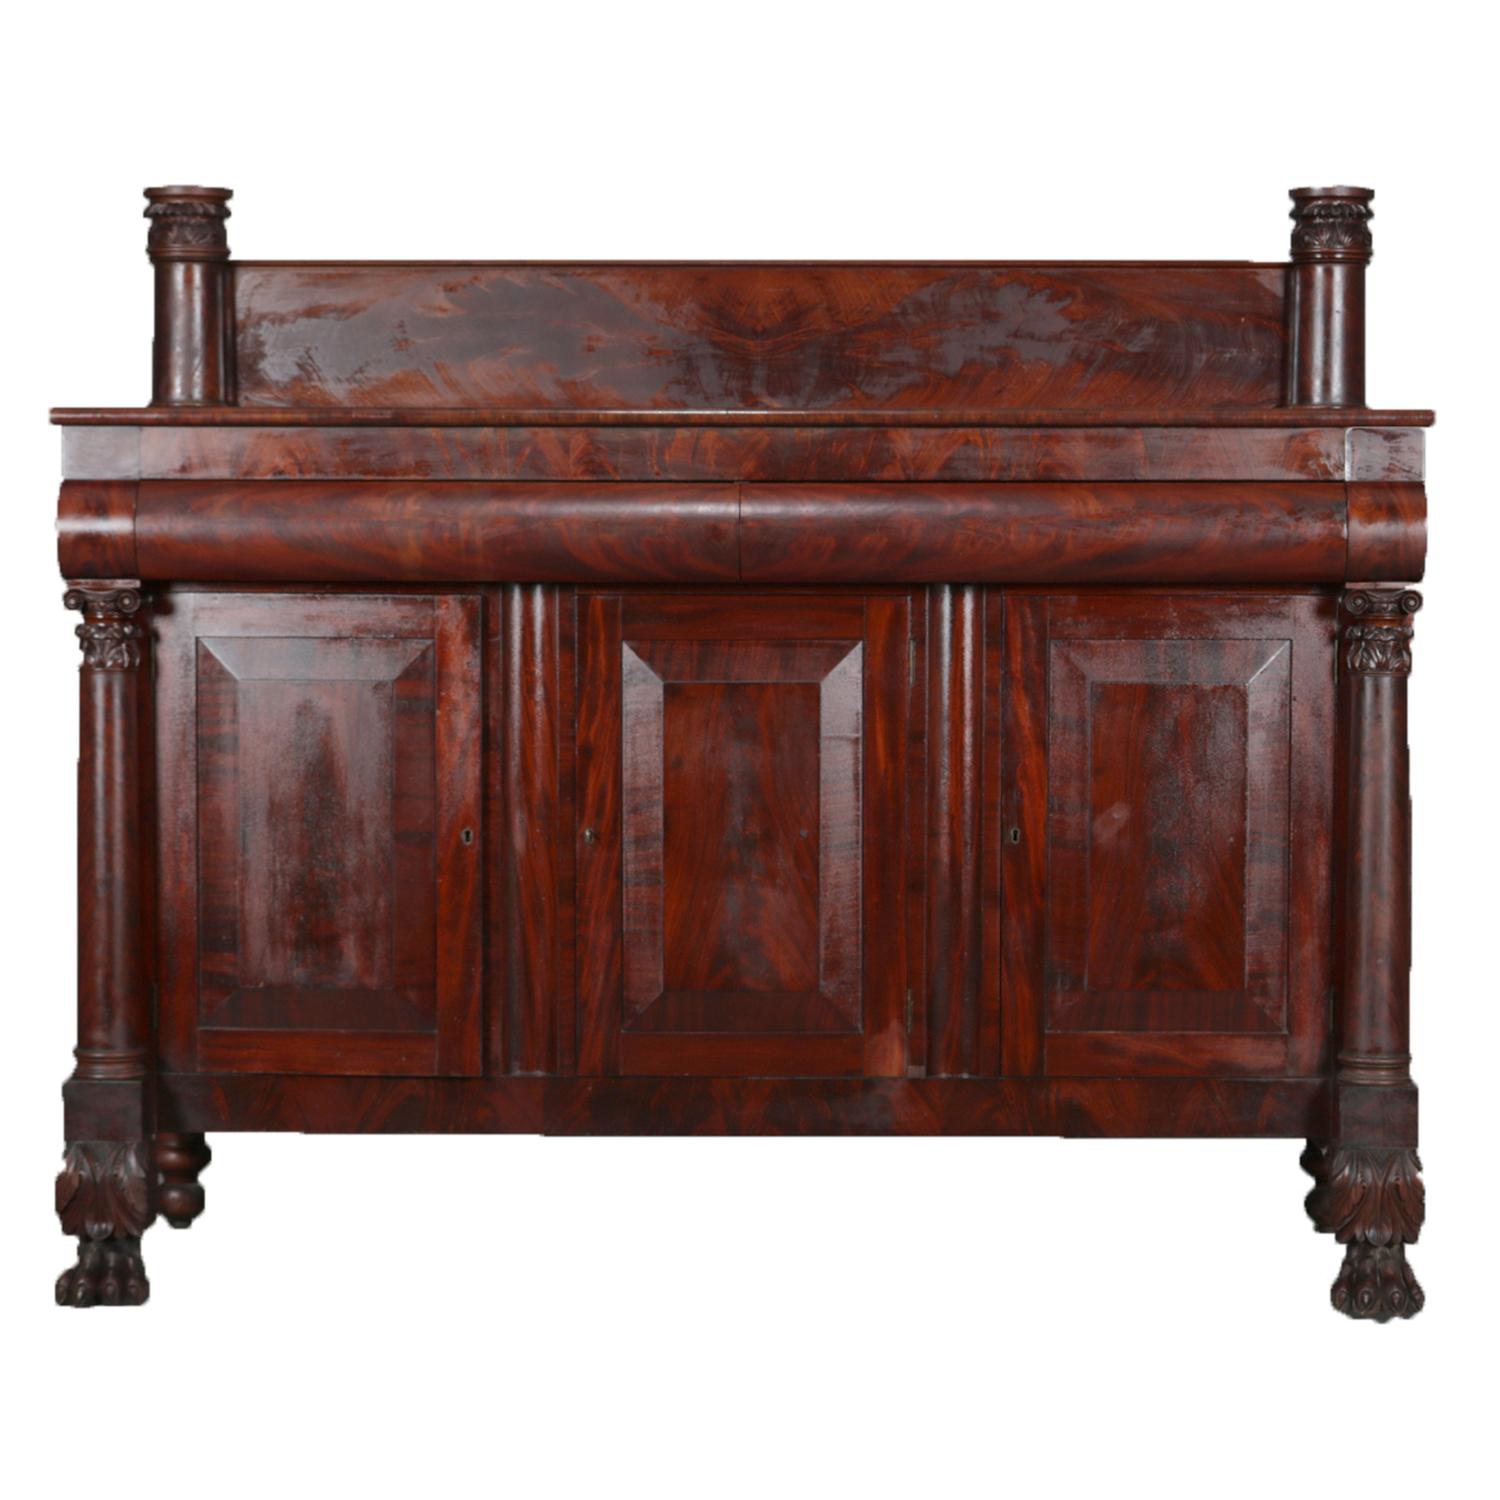 An antique Quervelle School American Empire mahogany sideboard features flame mahogany construction with backsplash flanked by full columns surmounted with deeply carved foliate capitals over case having two convex upper drawers and three lower